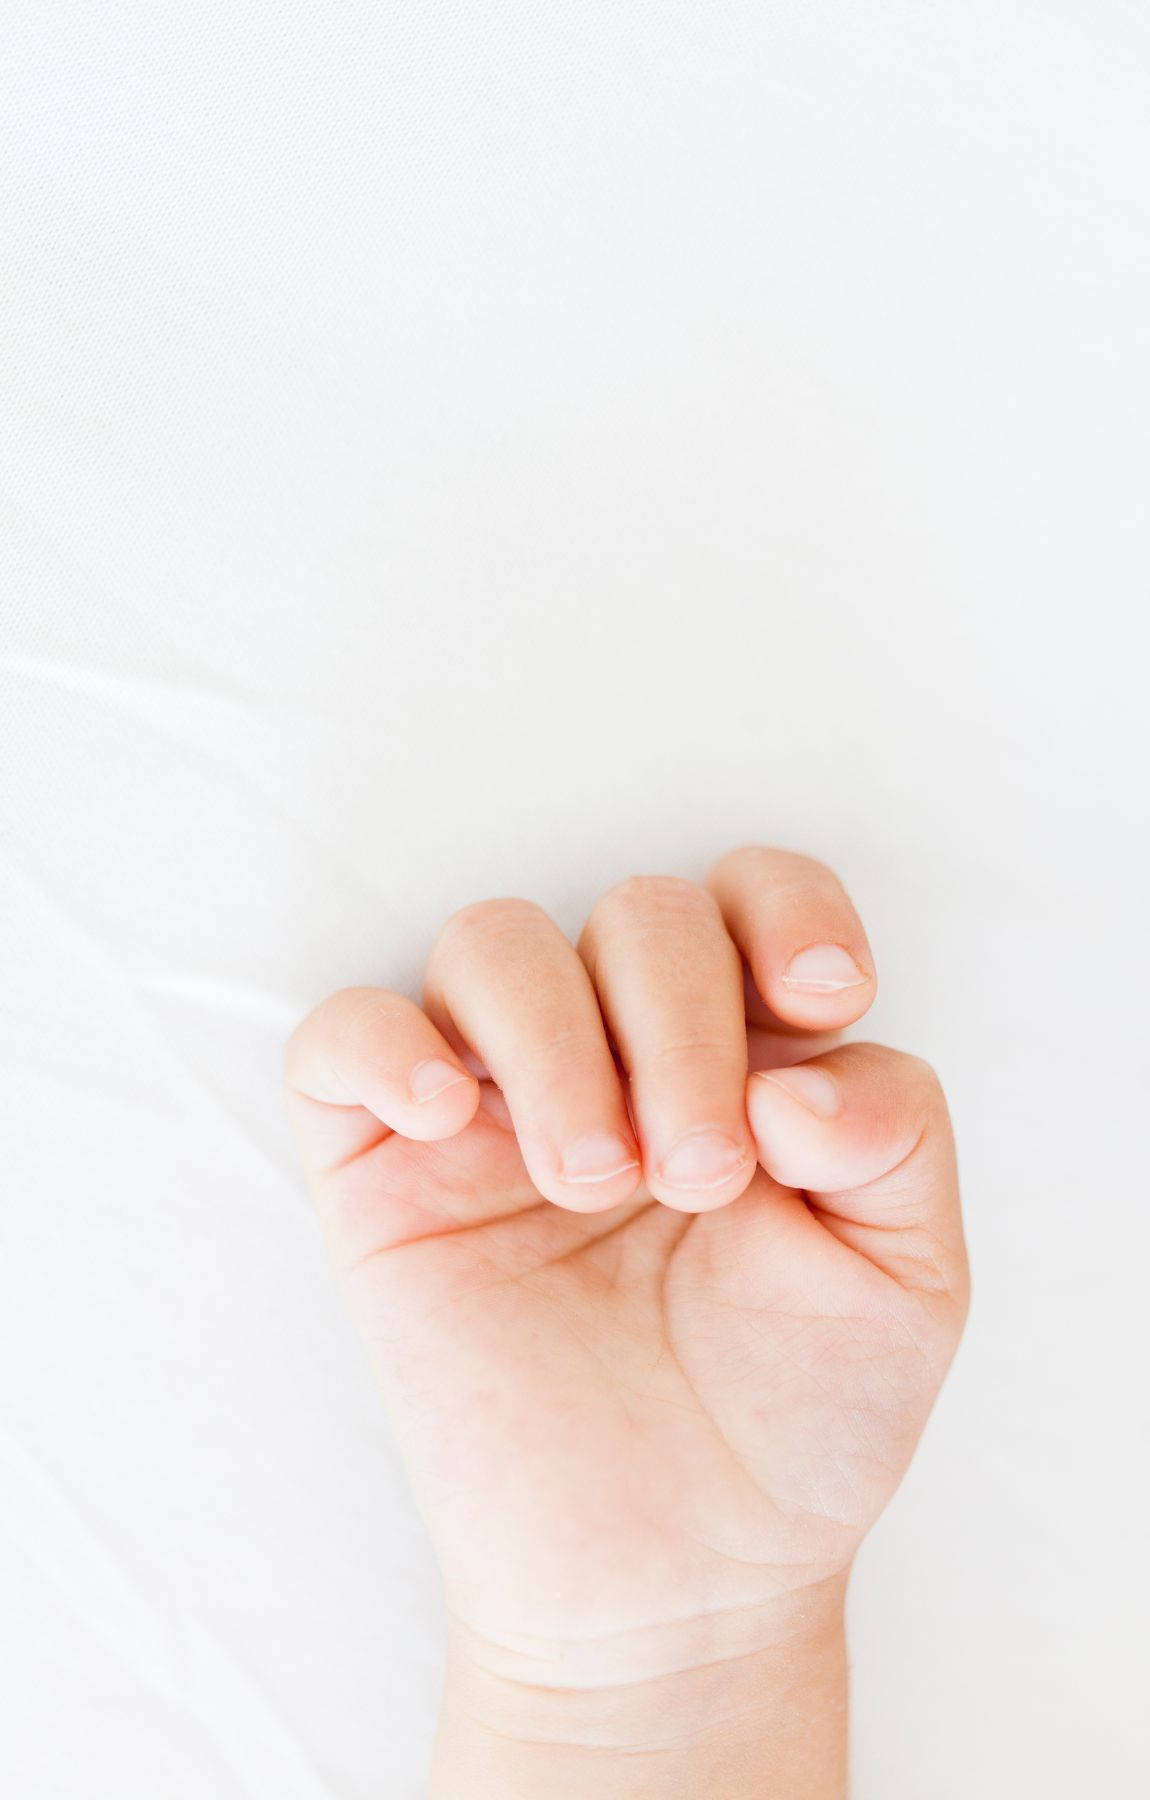 Touch of Innocence - Tiny Baby Hand Wallpaper